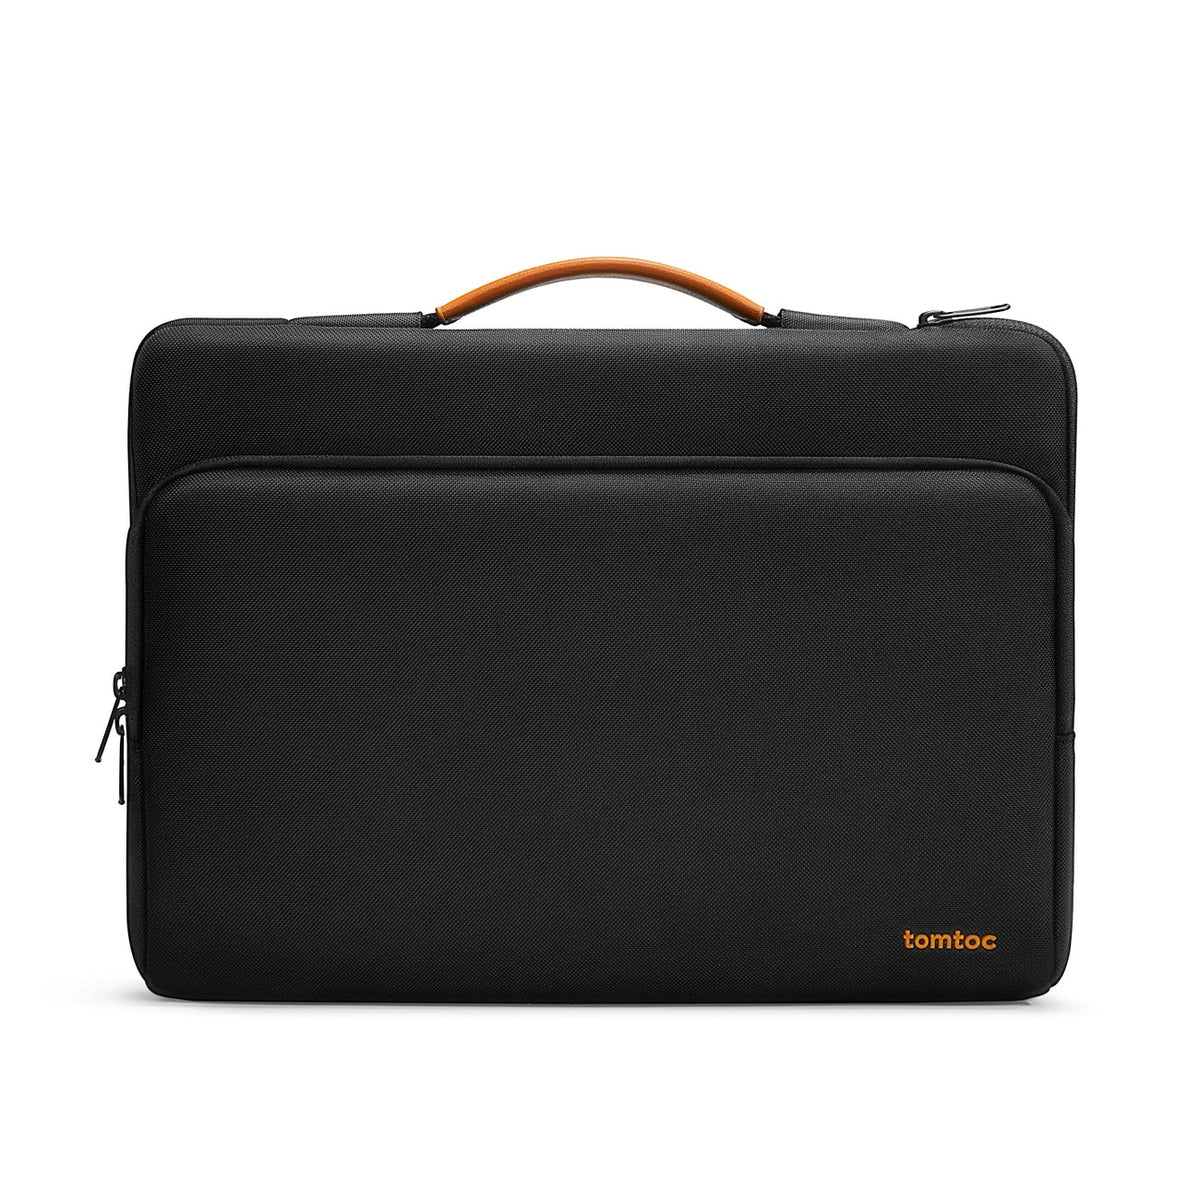 primary_Defender-A14 Laptop Briefcase For 15-inch MacBook Air/Pro